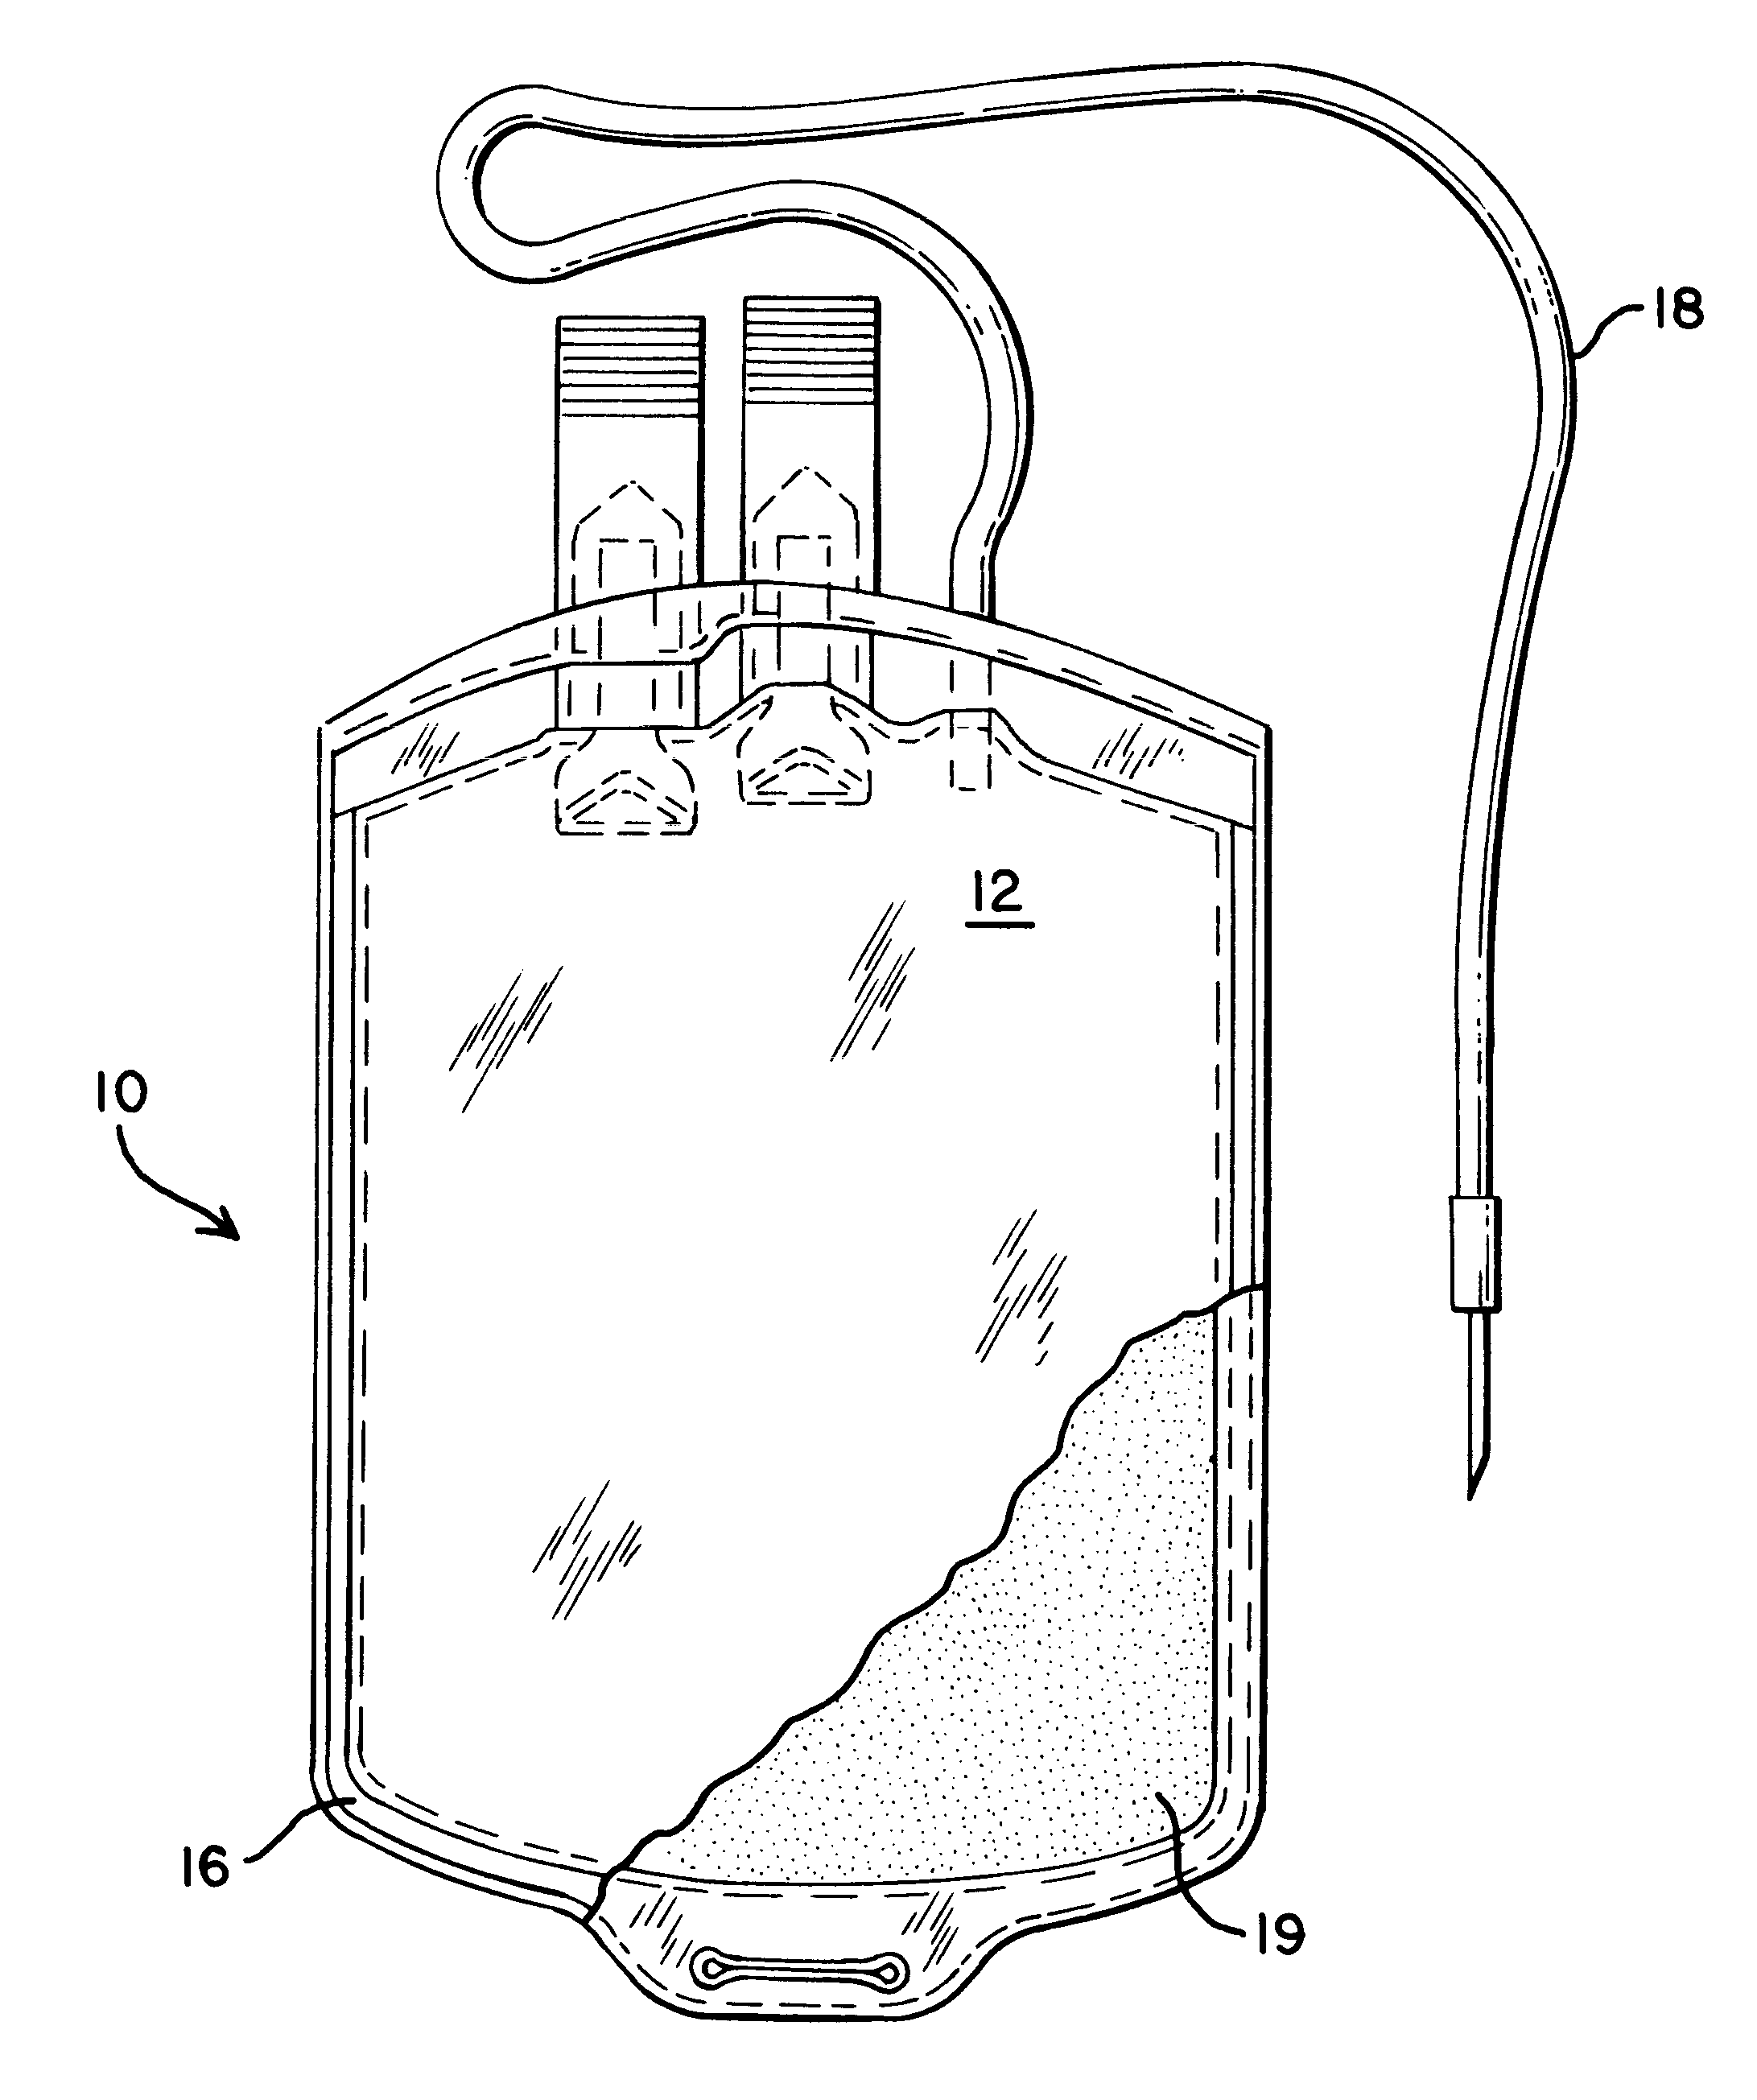 Plastic compositions including vitamin E for medical containers and methods for providing such compositions and containers